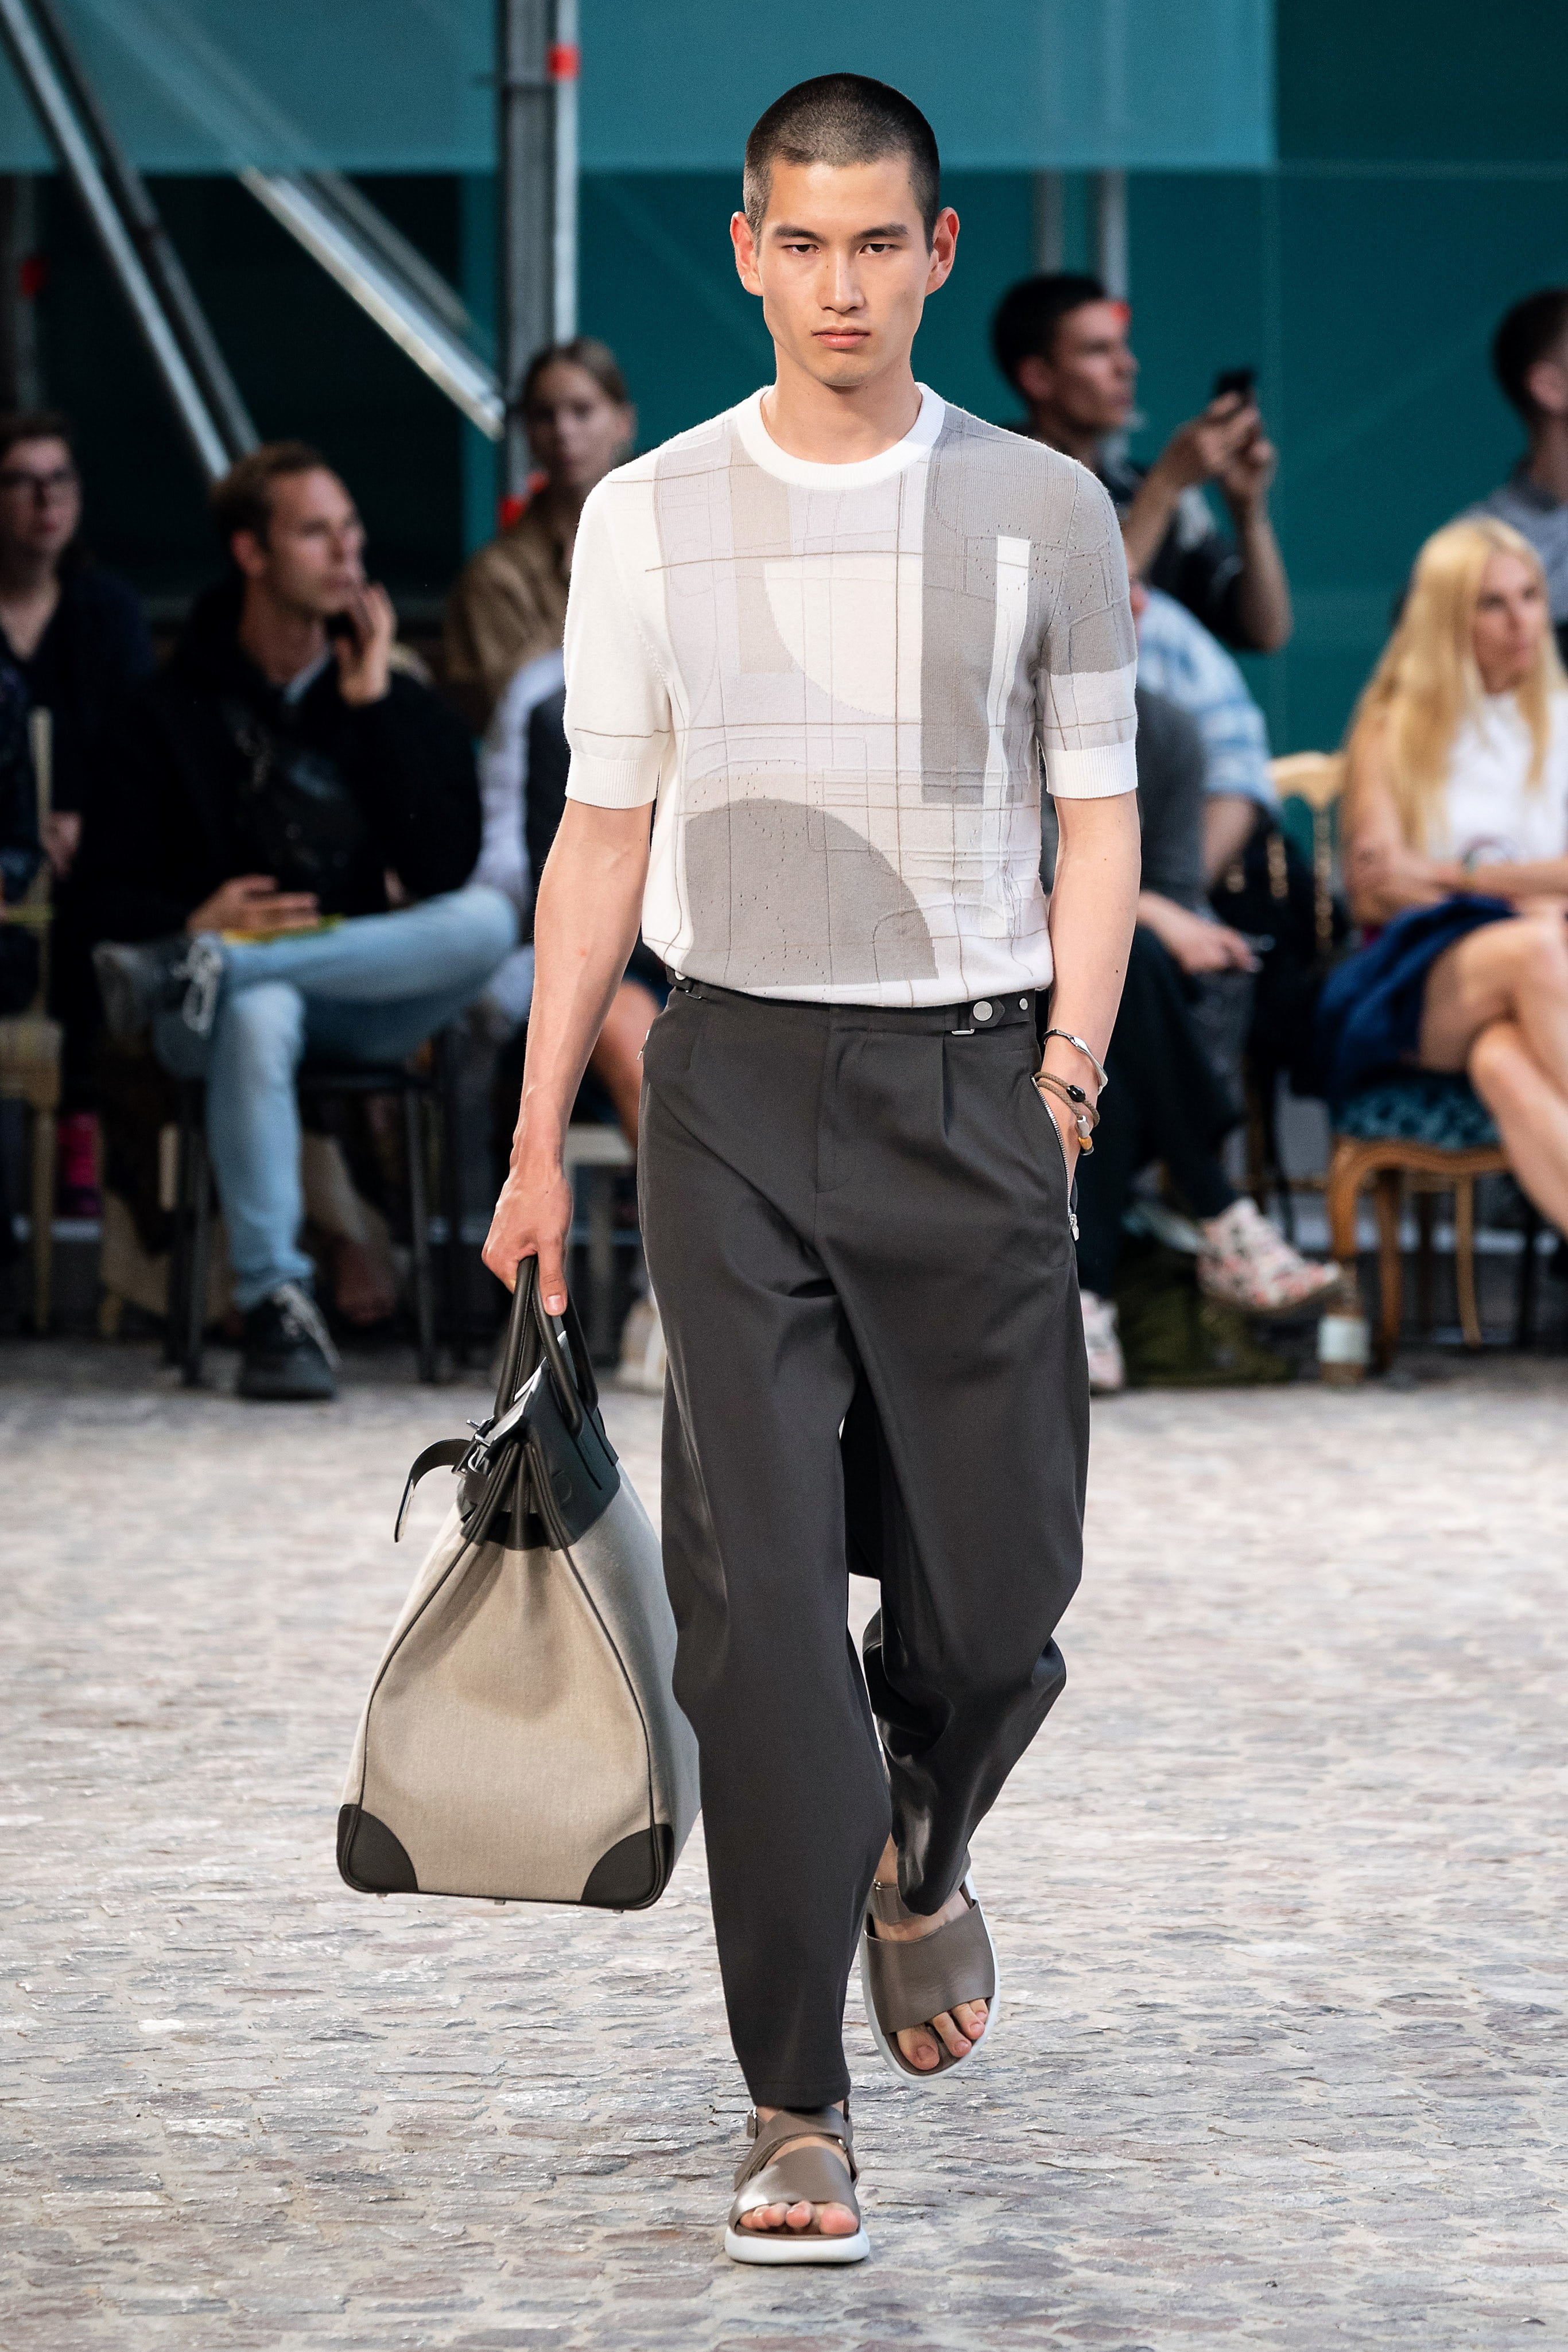 Why Are Men's Designer Bags Hitting Mainstream Popularity? – LIFESTYLE BY PS